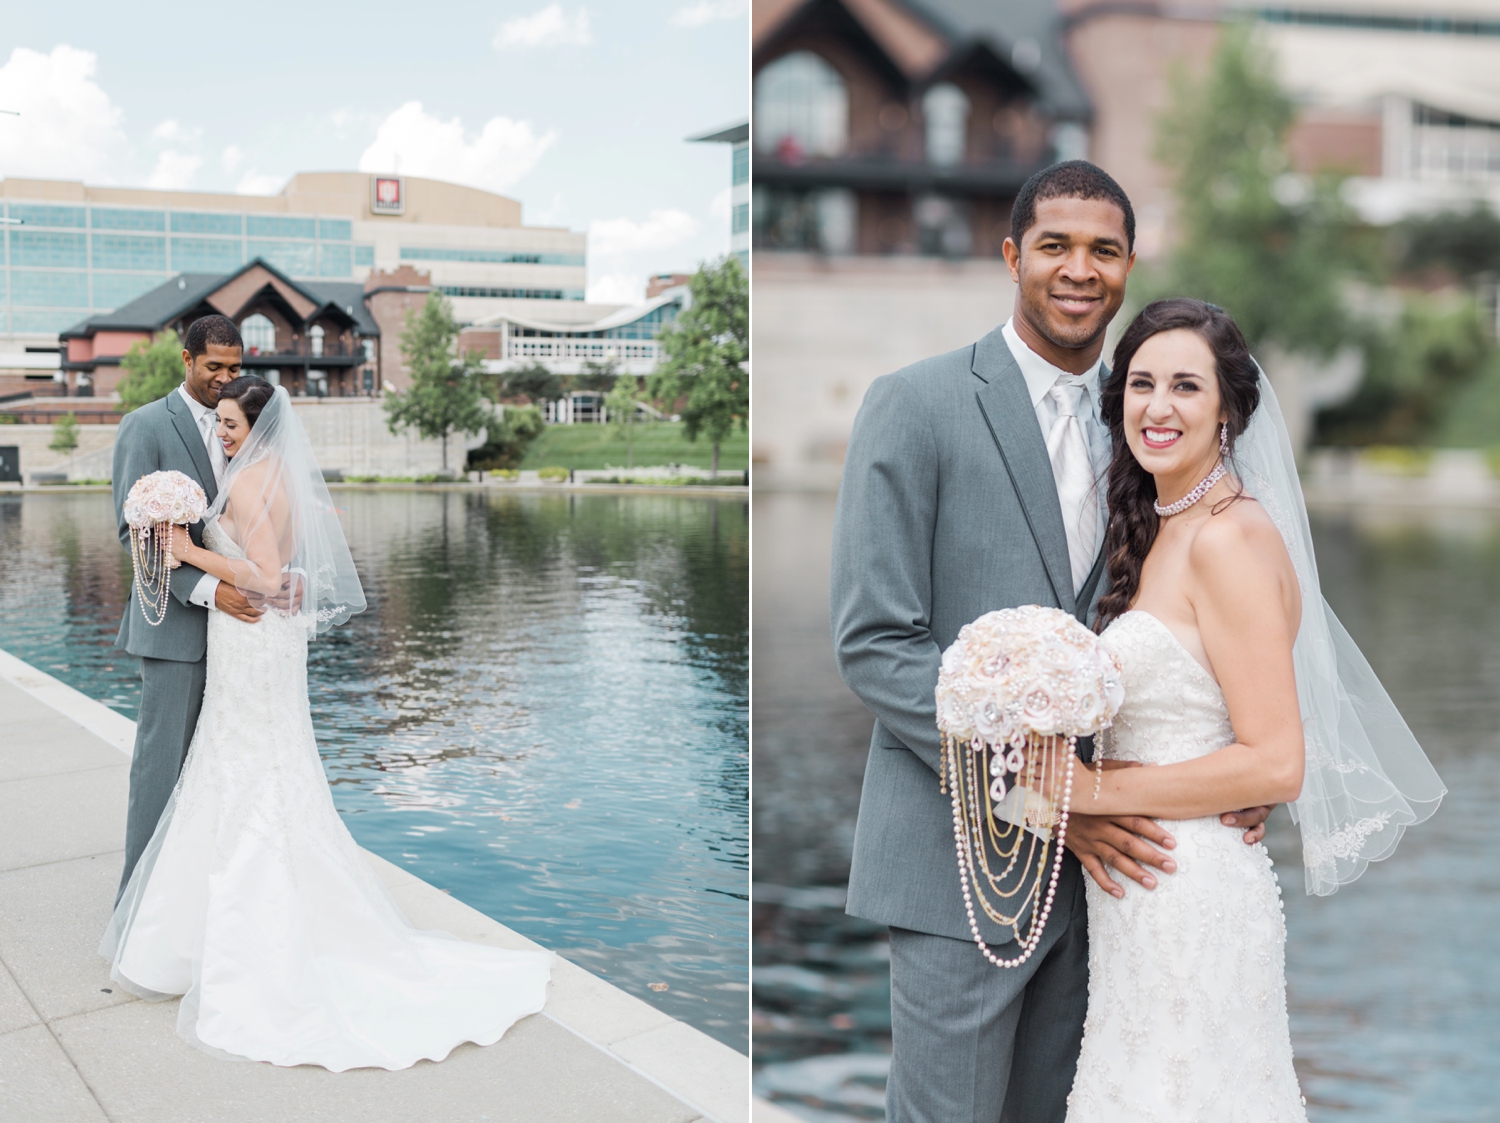 canal-337-downtown-indianapolis-wedding_0995.jpg